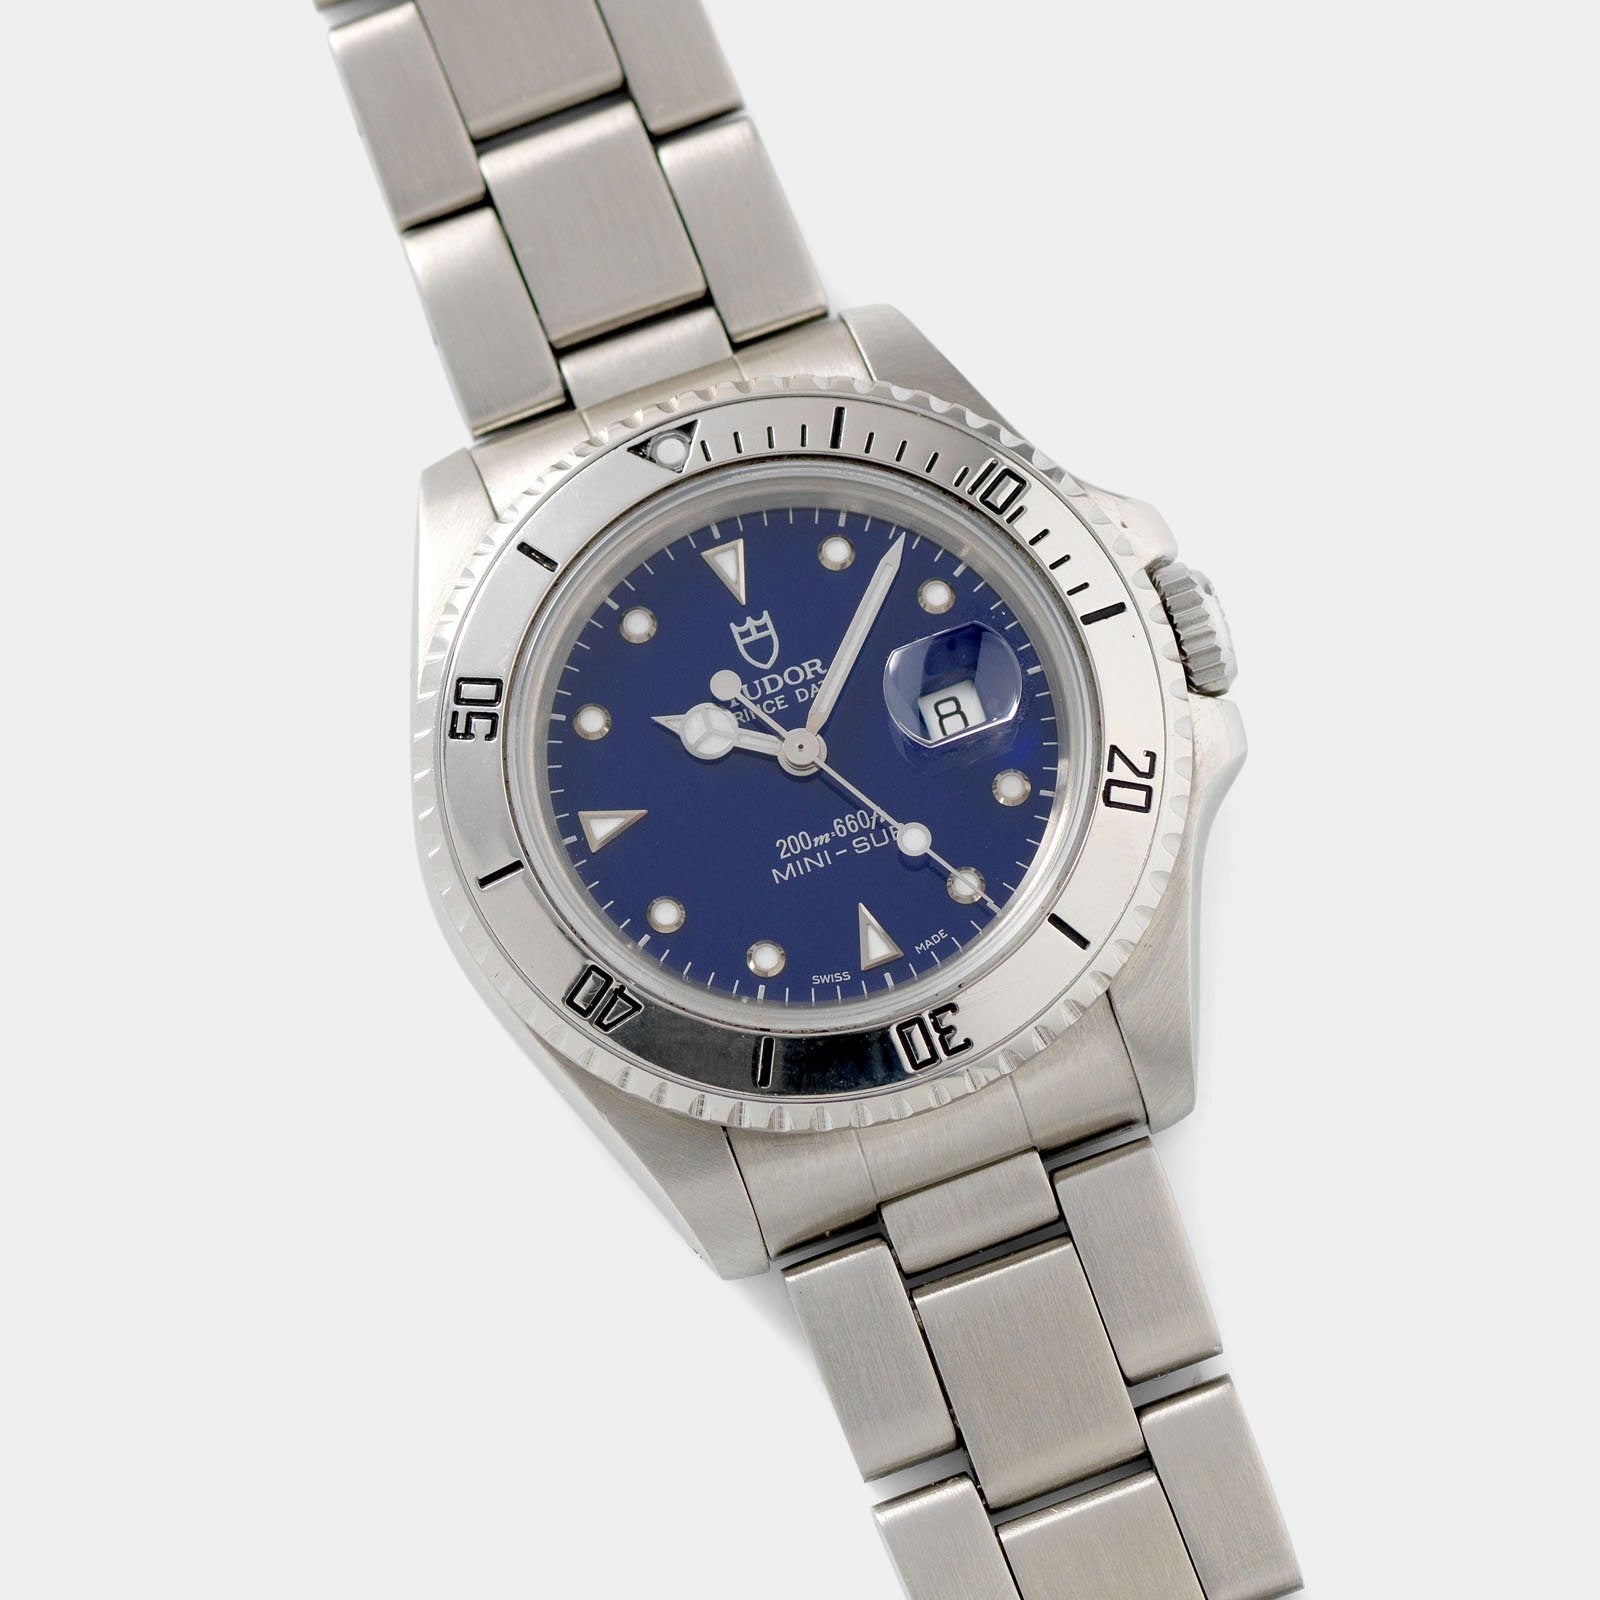 Tudor Submariner Prince Date Gloss Blue Dial Reference 73190